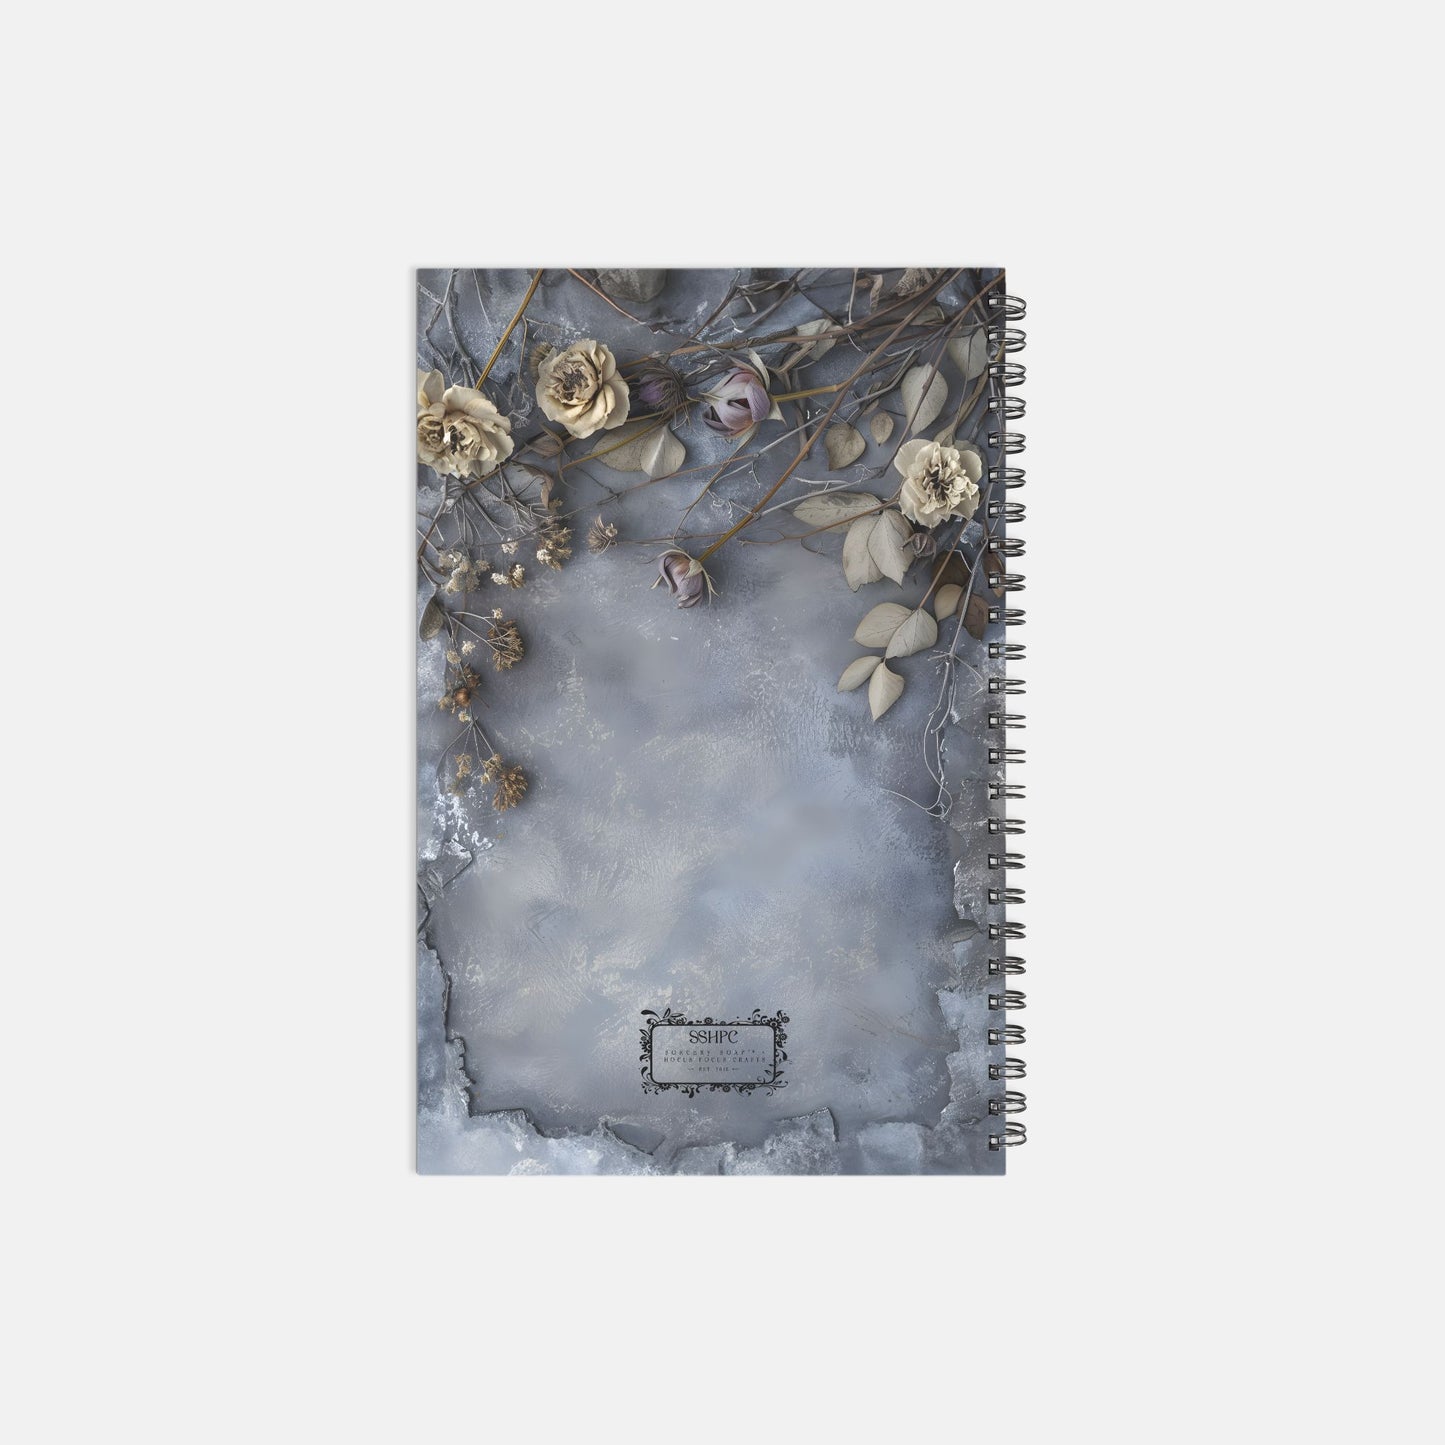 Faded Notebook Hardcover Spiral 5.5 x 8.5